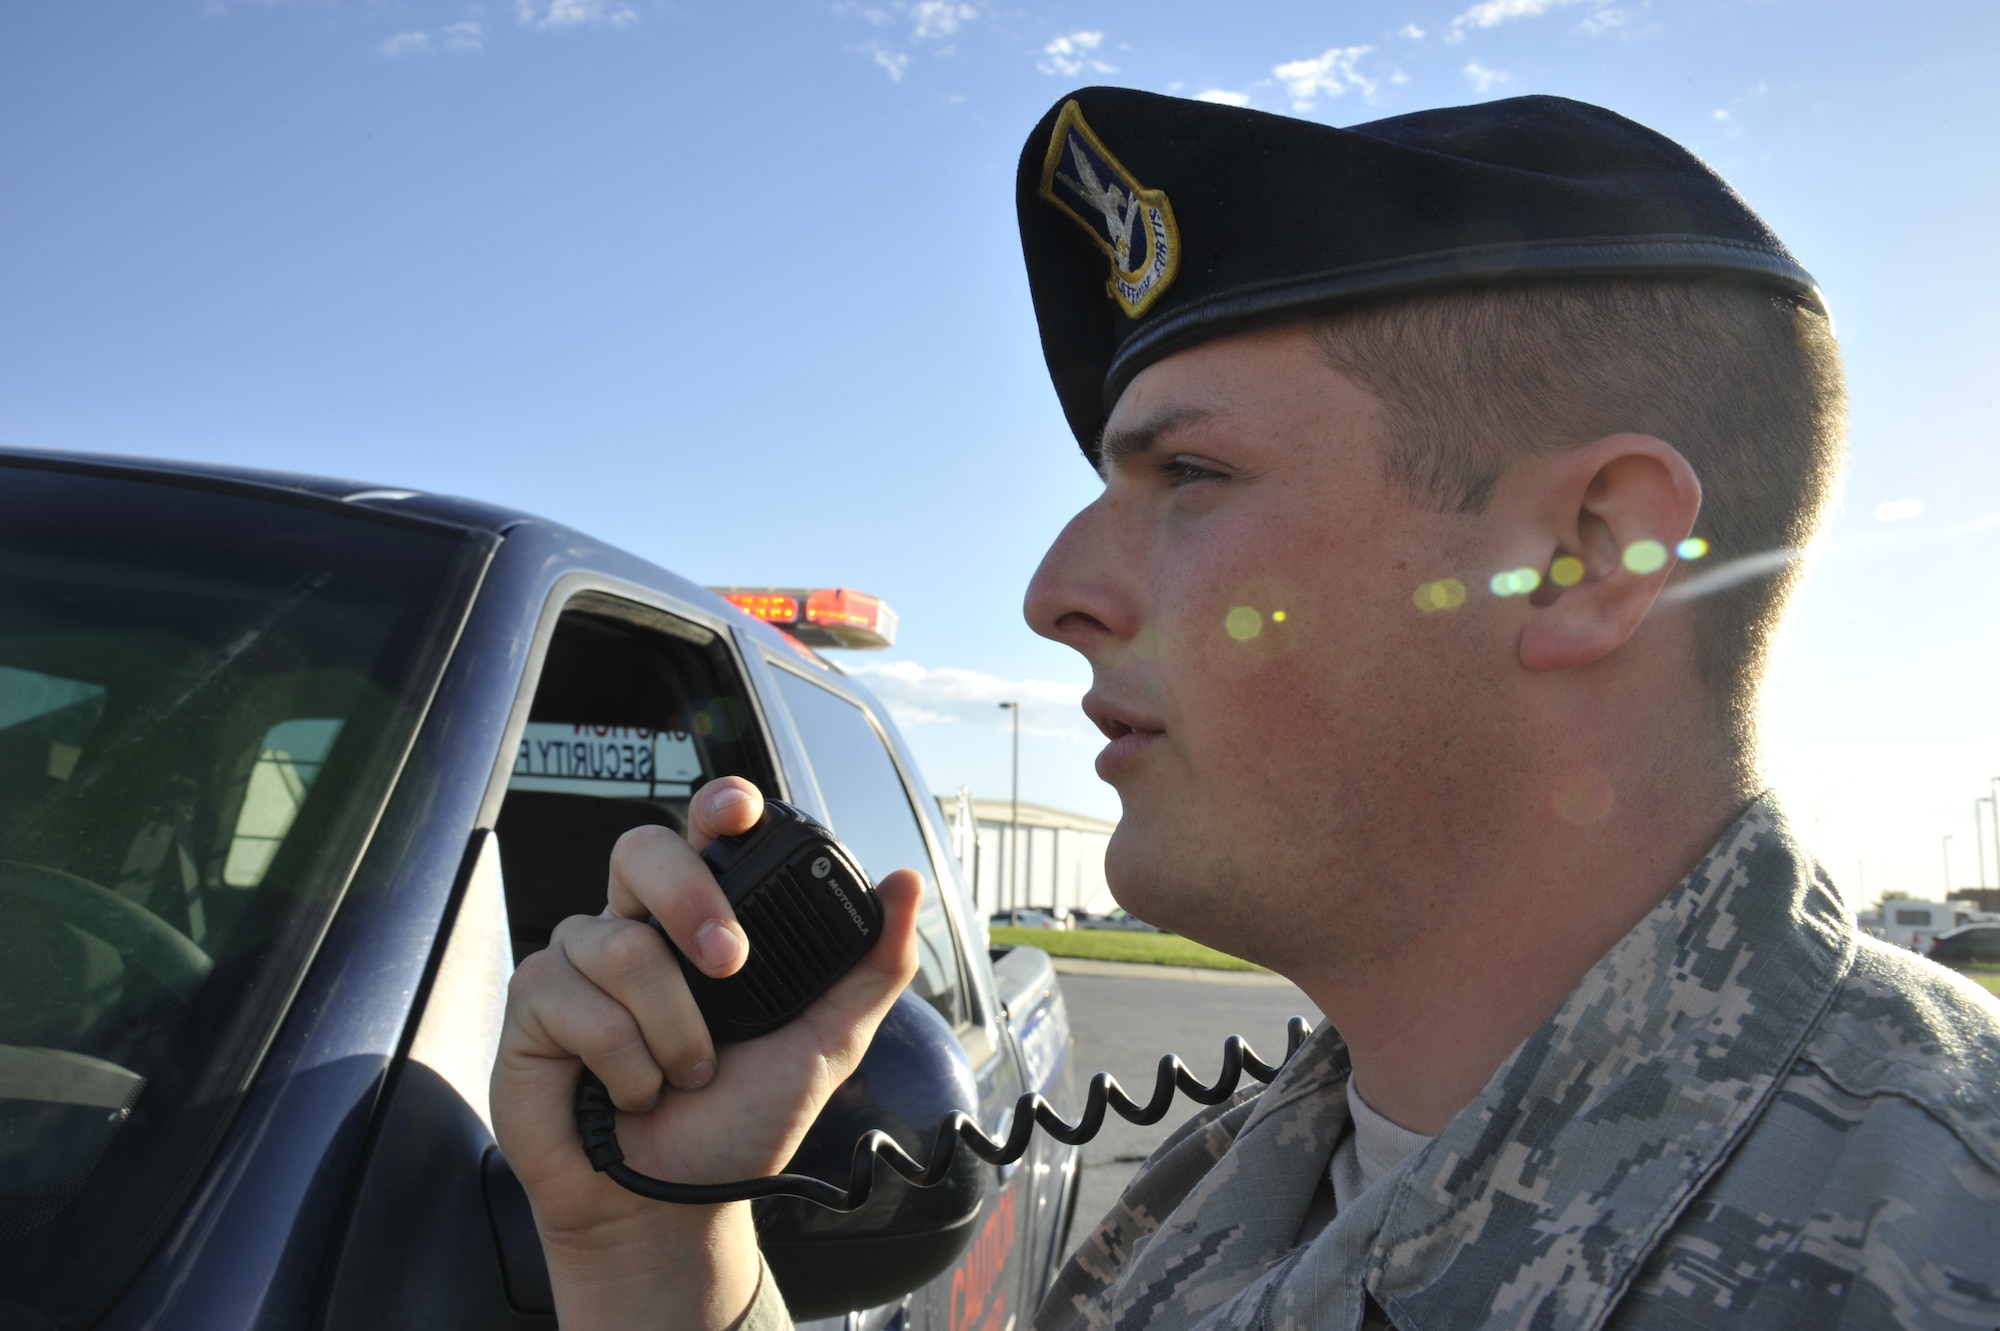 U.S. Air Force Senior Airman Matthew Hinson, 509th Security Forces Squadron patrolman, talks on a whisper mic at Whiteman Air Force Base, Mo., Oct. 8, 2014. The whisper mic is used to relay information to the police services desk during responses to unannounced building alarms.  (U.S. Air Force photo by Airman 1st Class Keenan Berry/Released)